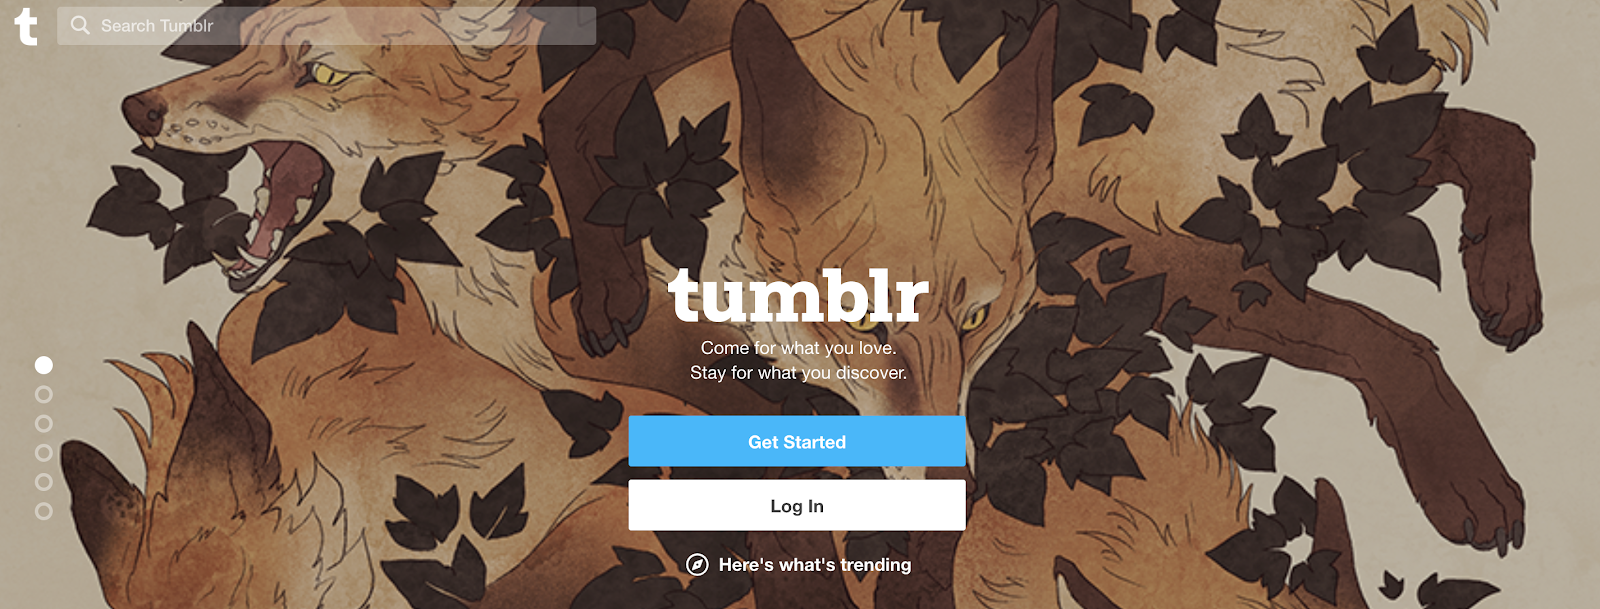 Tumblr as a Top Free Blog Site to Get Started on